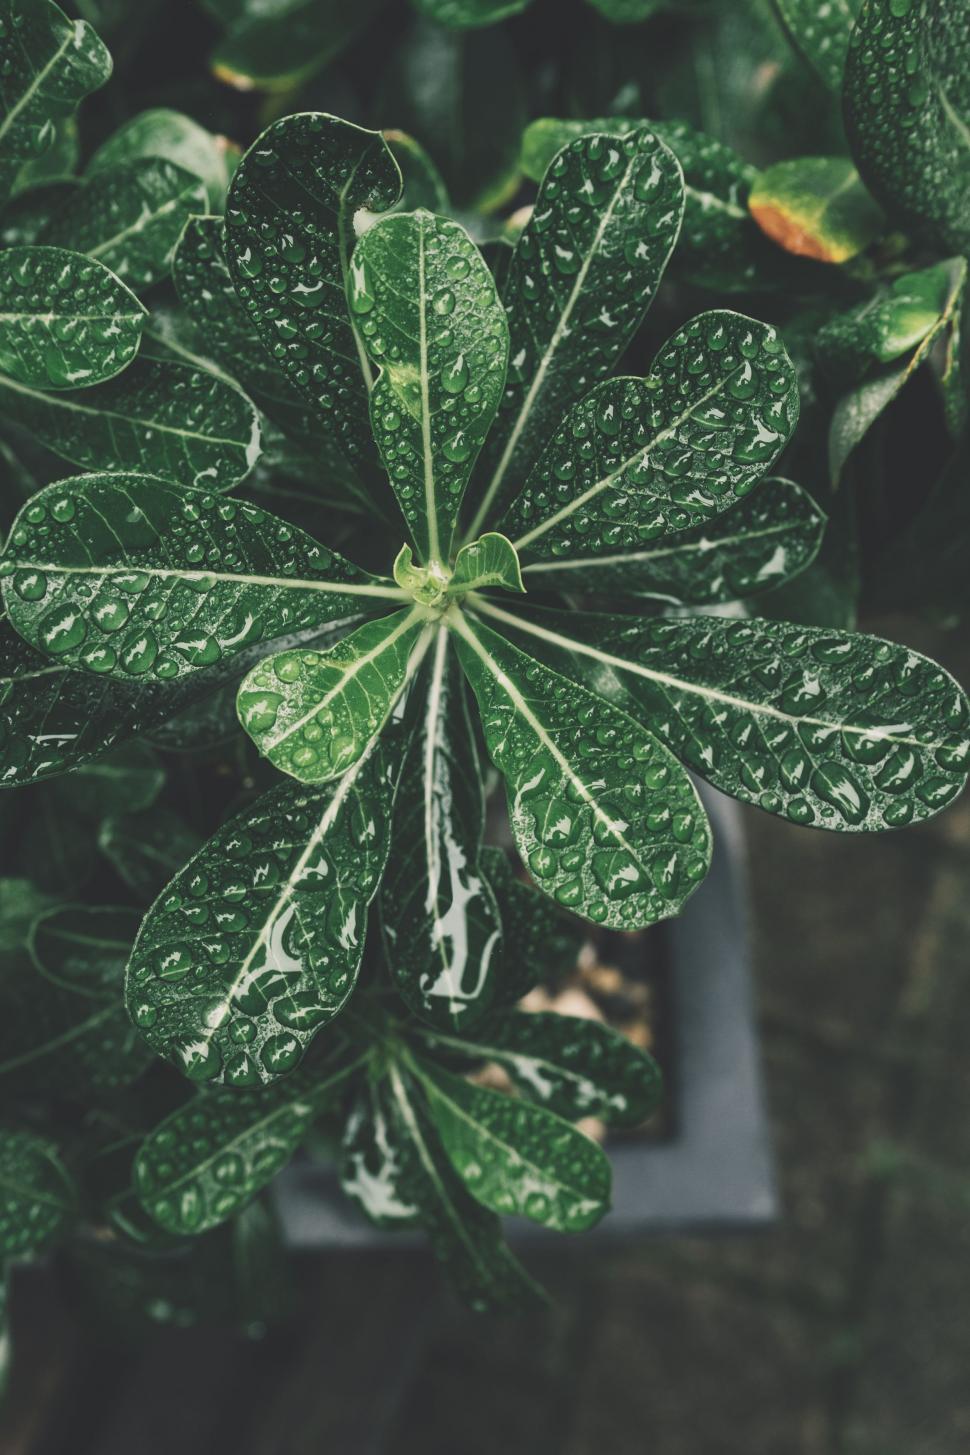 Free Image of Water Drops on Leaves  